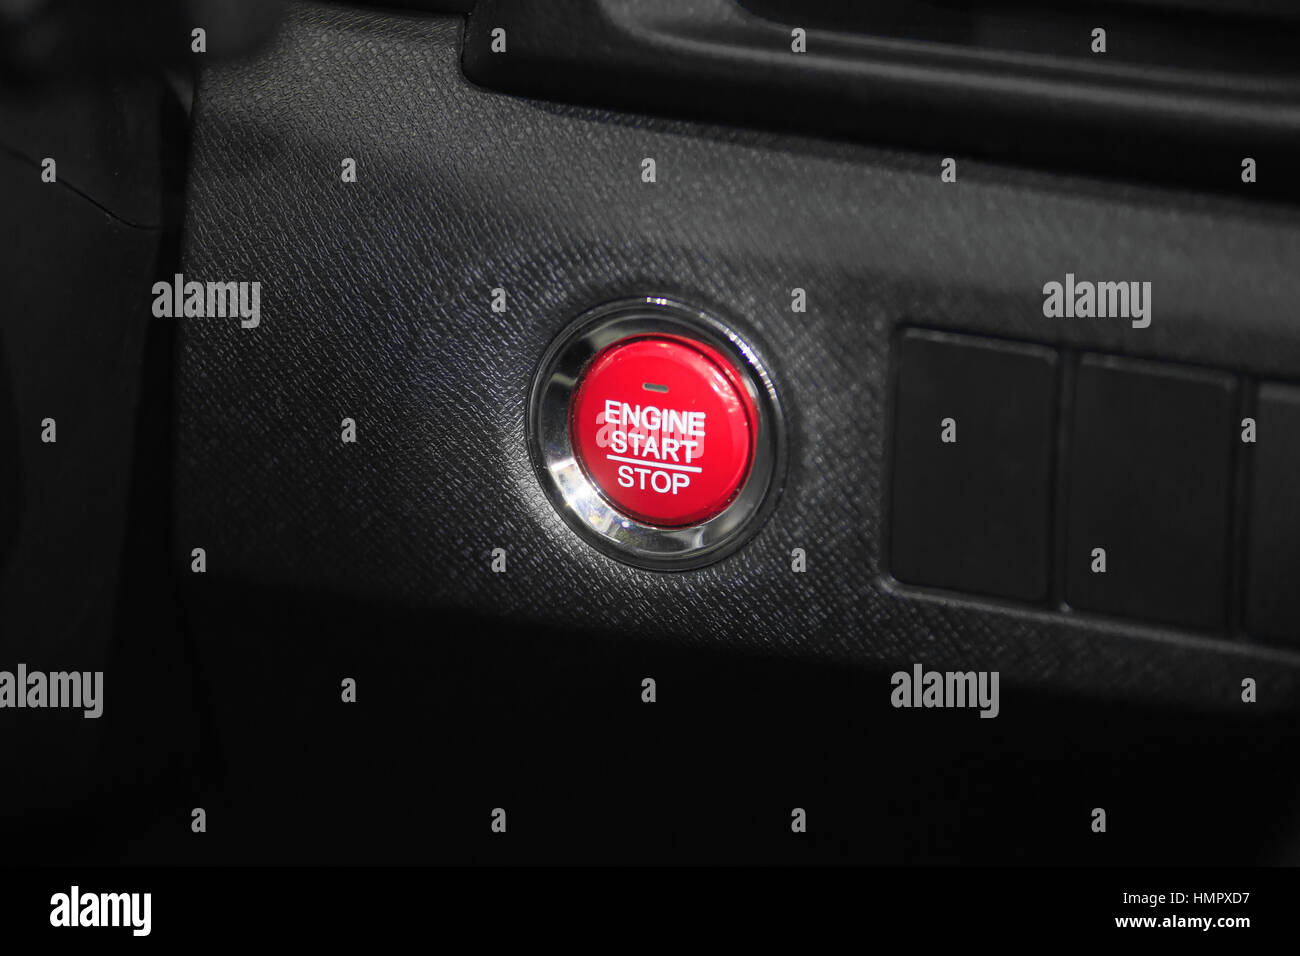 Detail close up of red engine start stop car button in modern car. Stock Photo